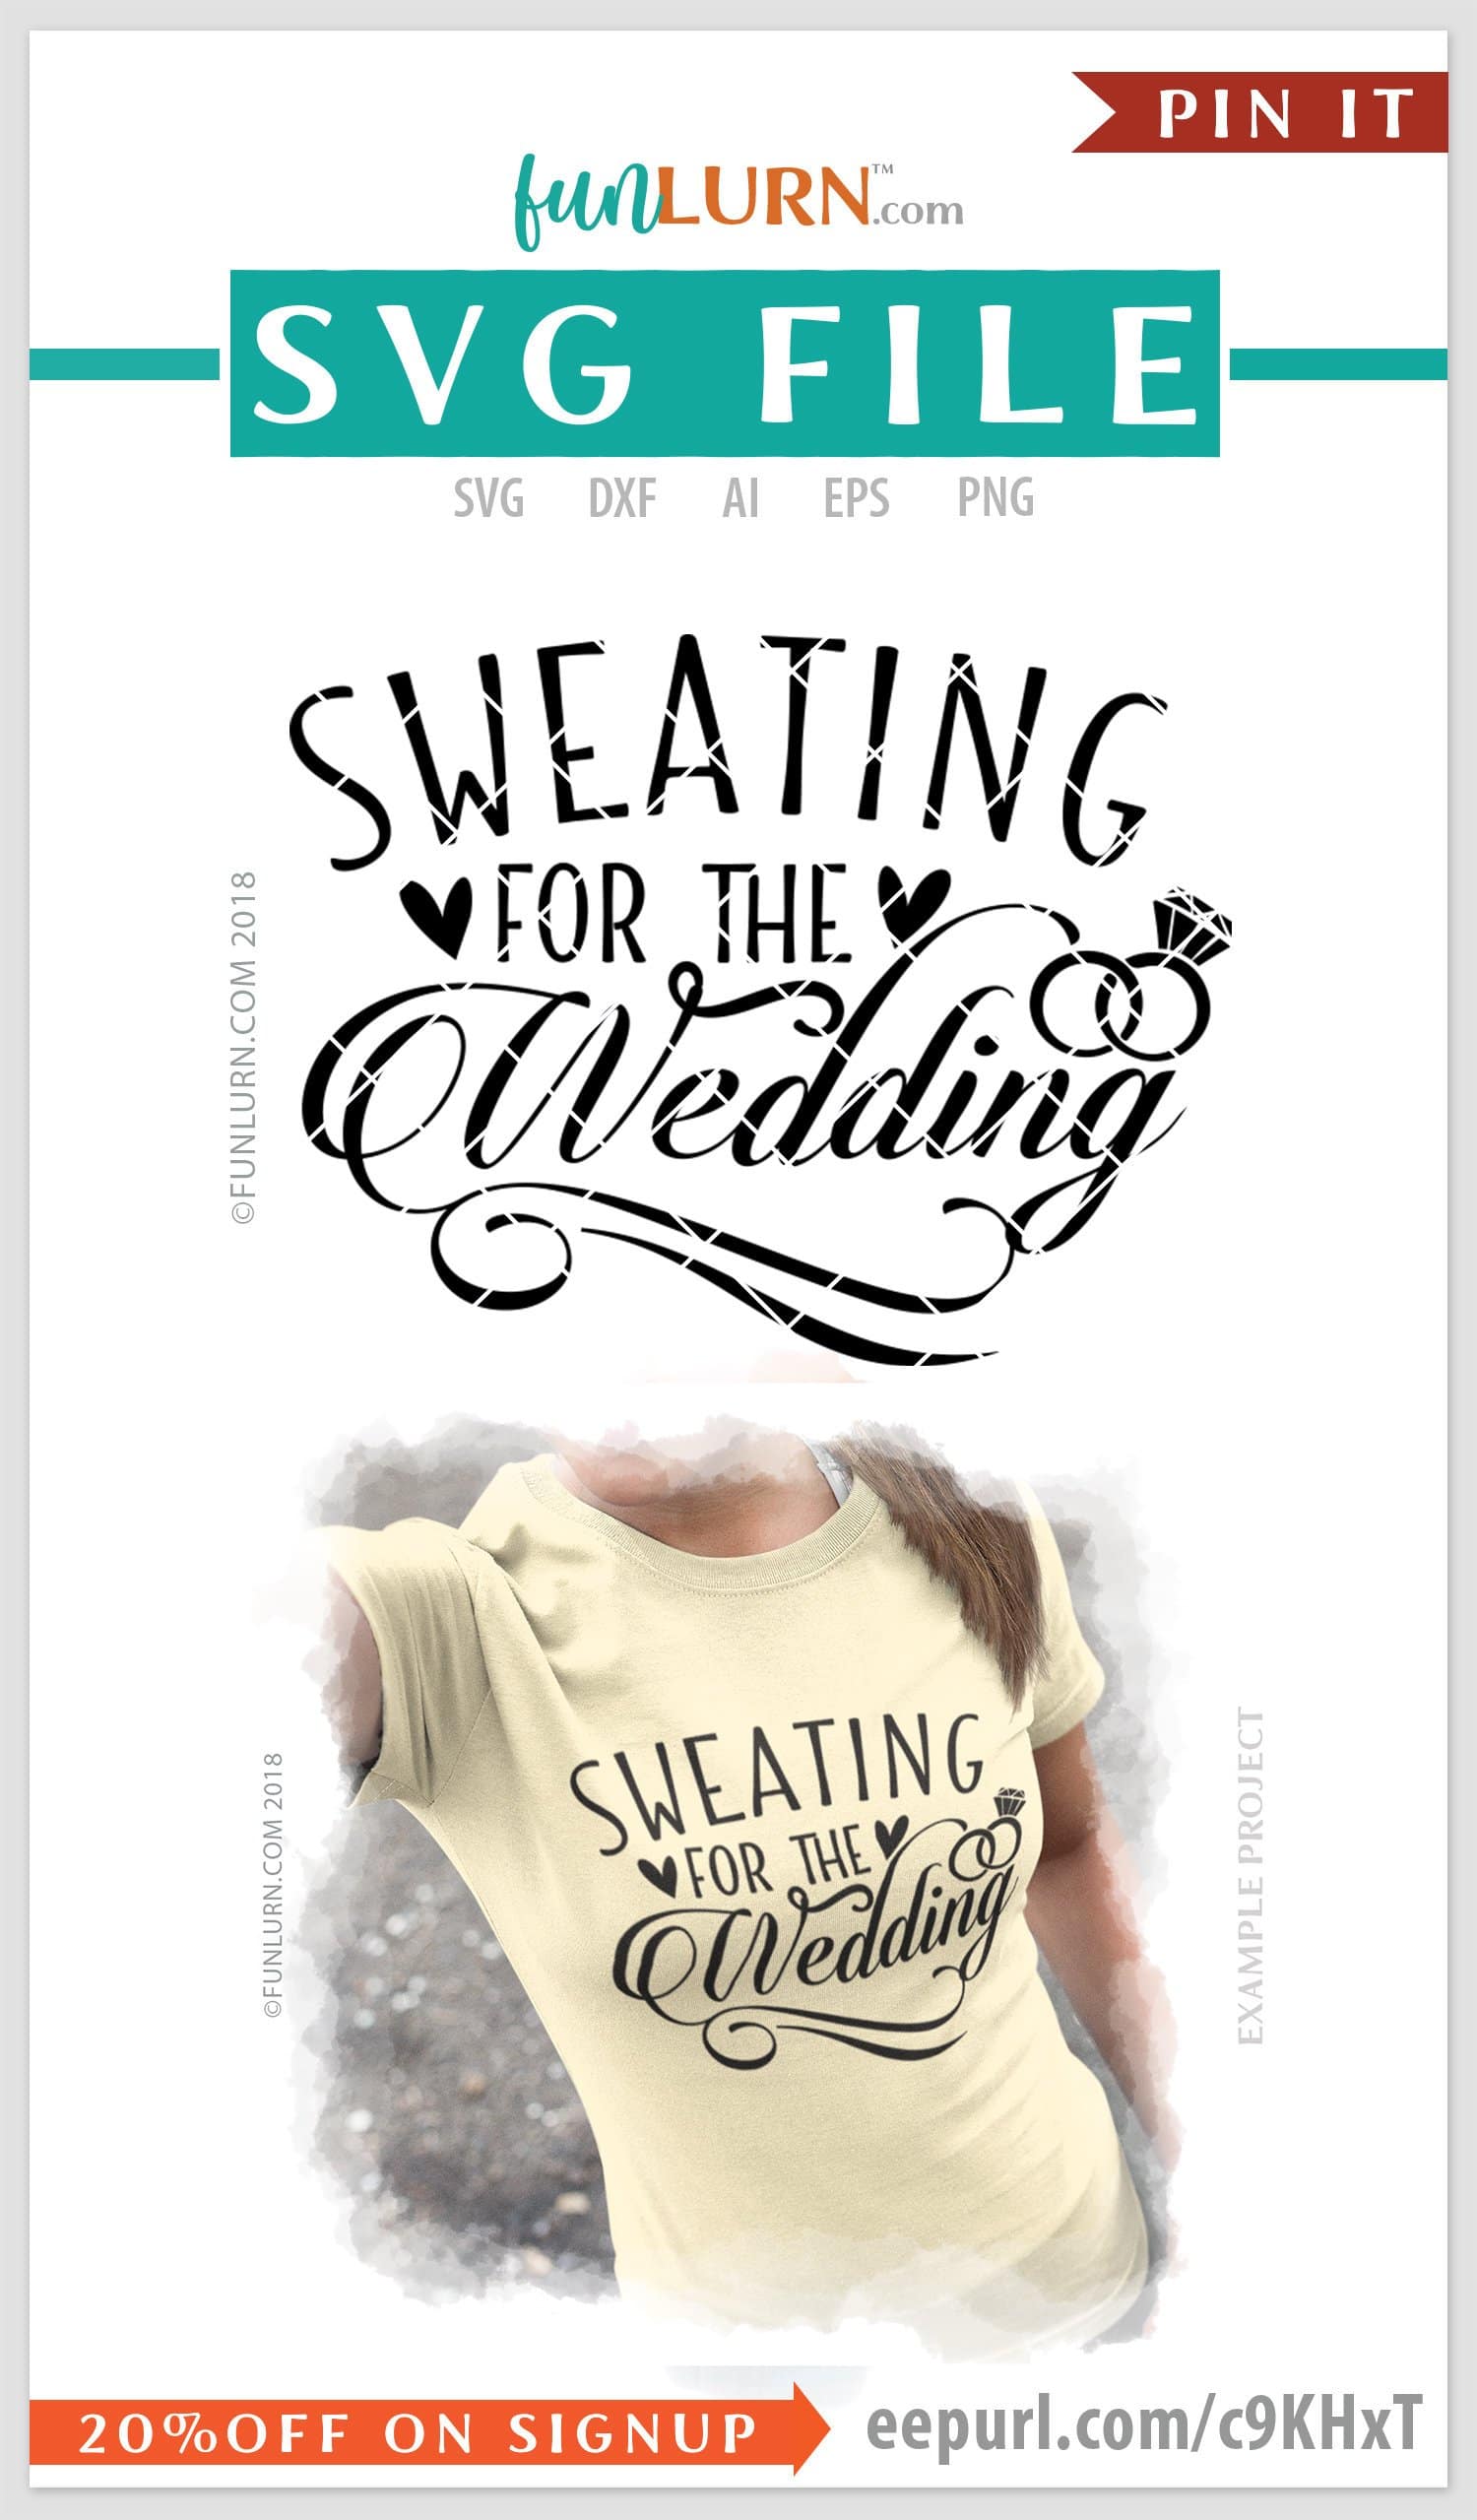 Download Sweating for the wedding SVG - FunLurn